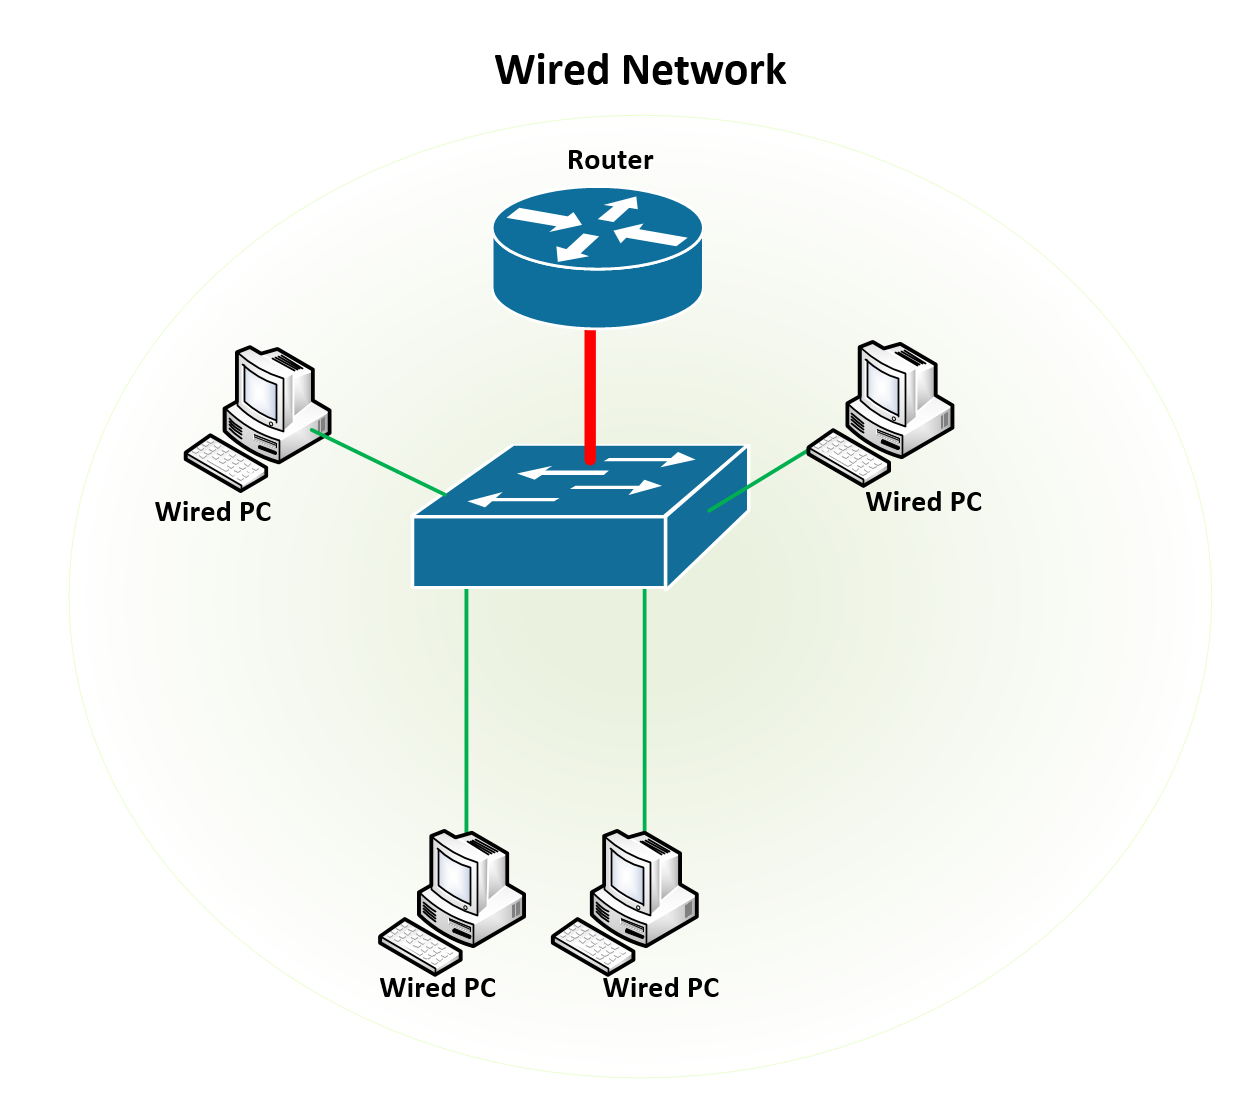 Source connection connection. Wired Network. Беспроводные сети. Wired and Wireless Networks. Сети маршрутизатор Интерфейс.